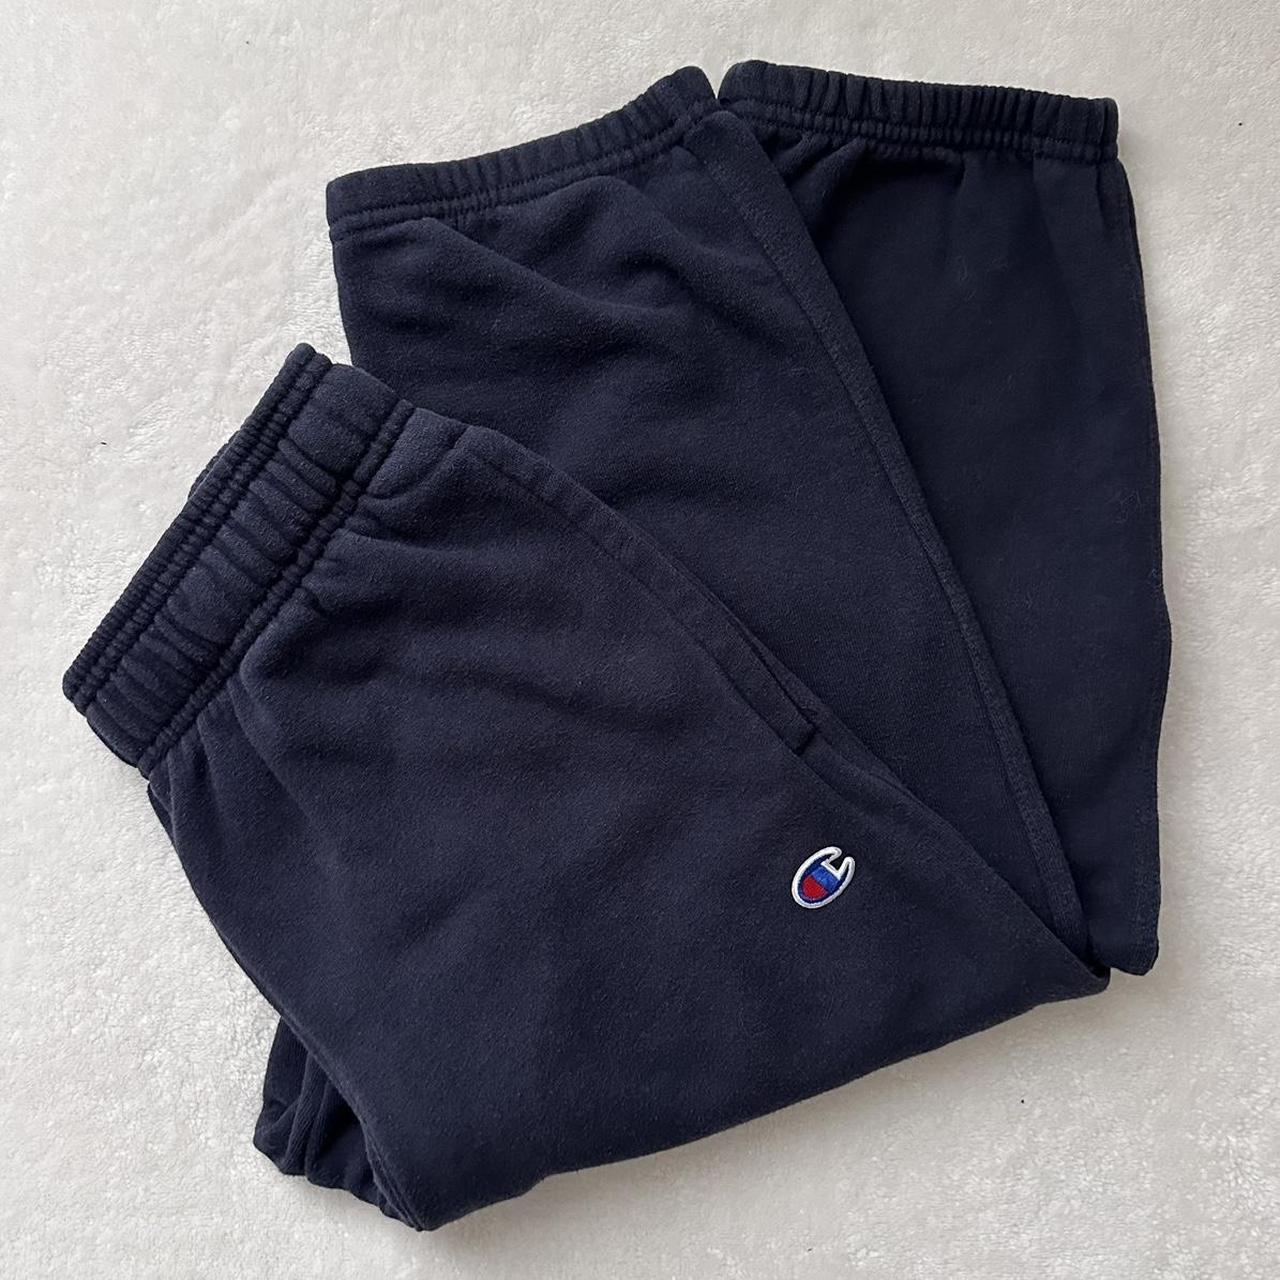 Women's Blue and Navy Joggers-tracksuits | Depop